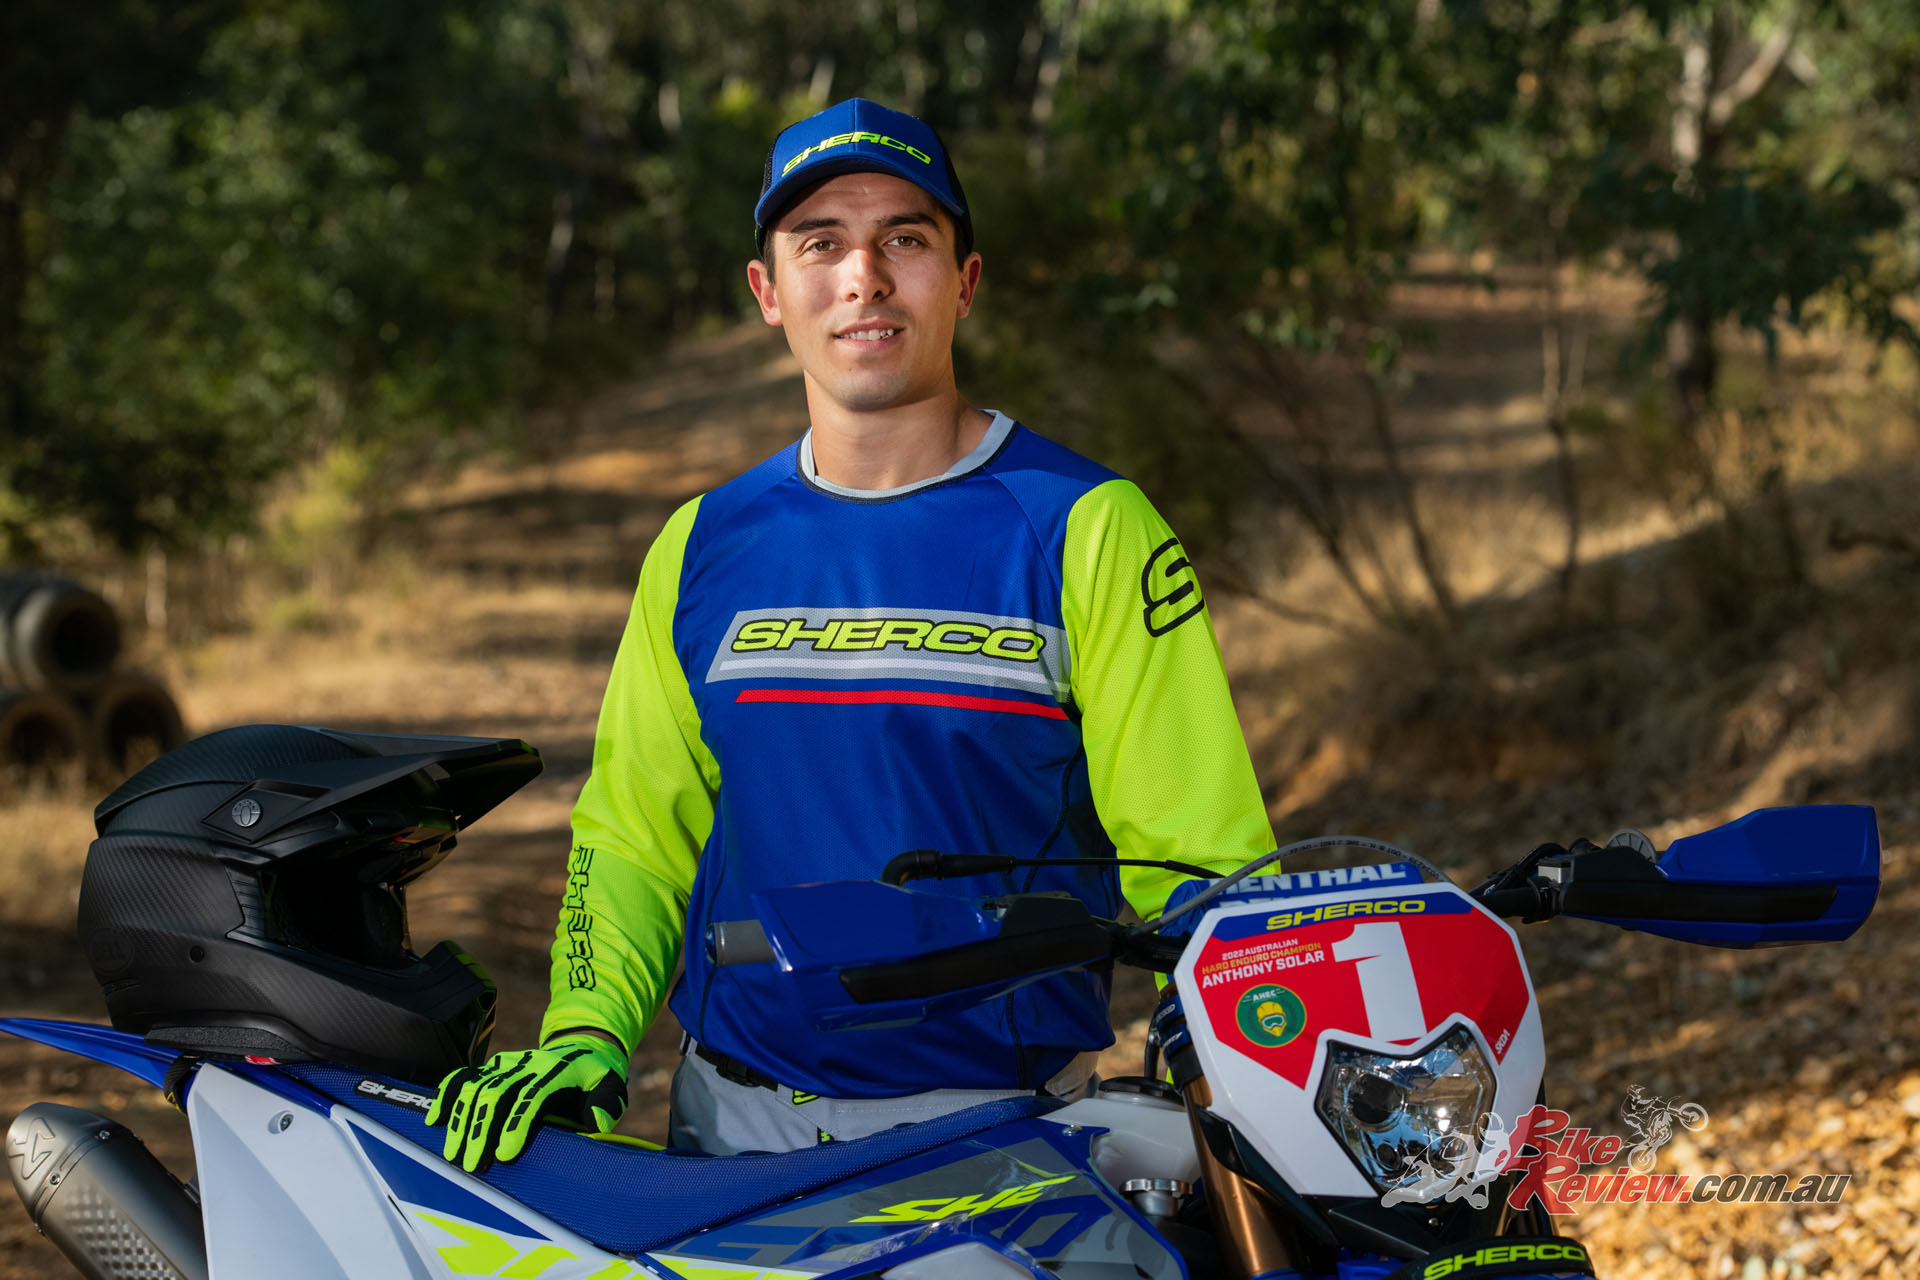 Reigning Australian Hard Enduro Champion, Anthony Solar, will defend his #1 plate aboard his 300 SE Factory.